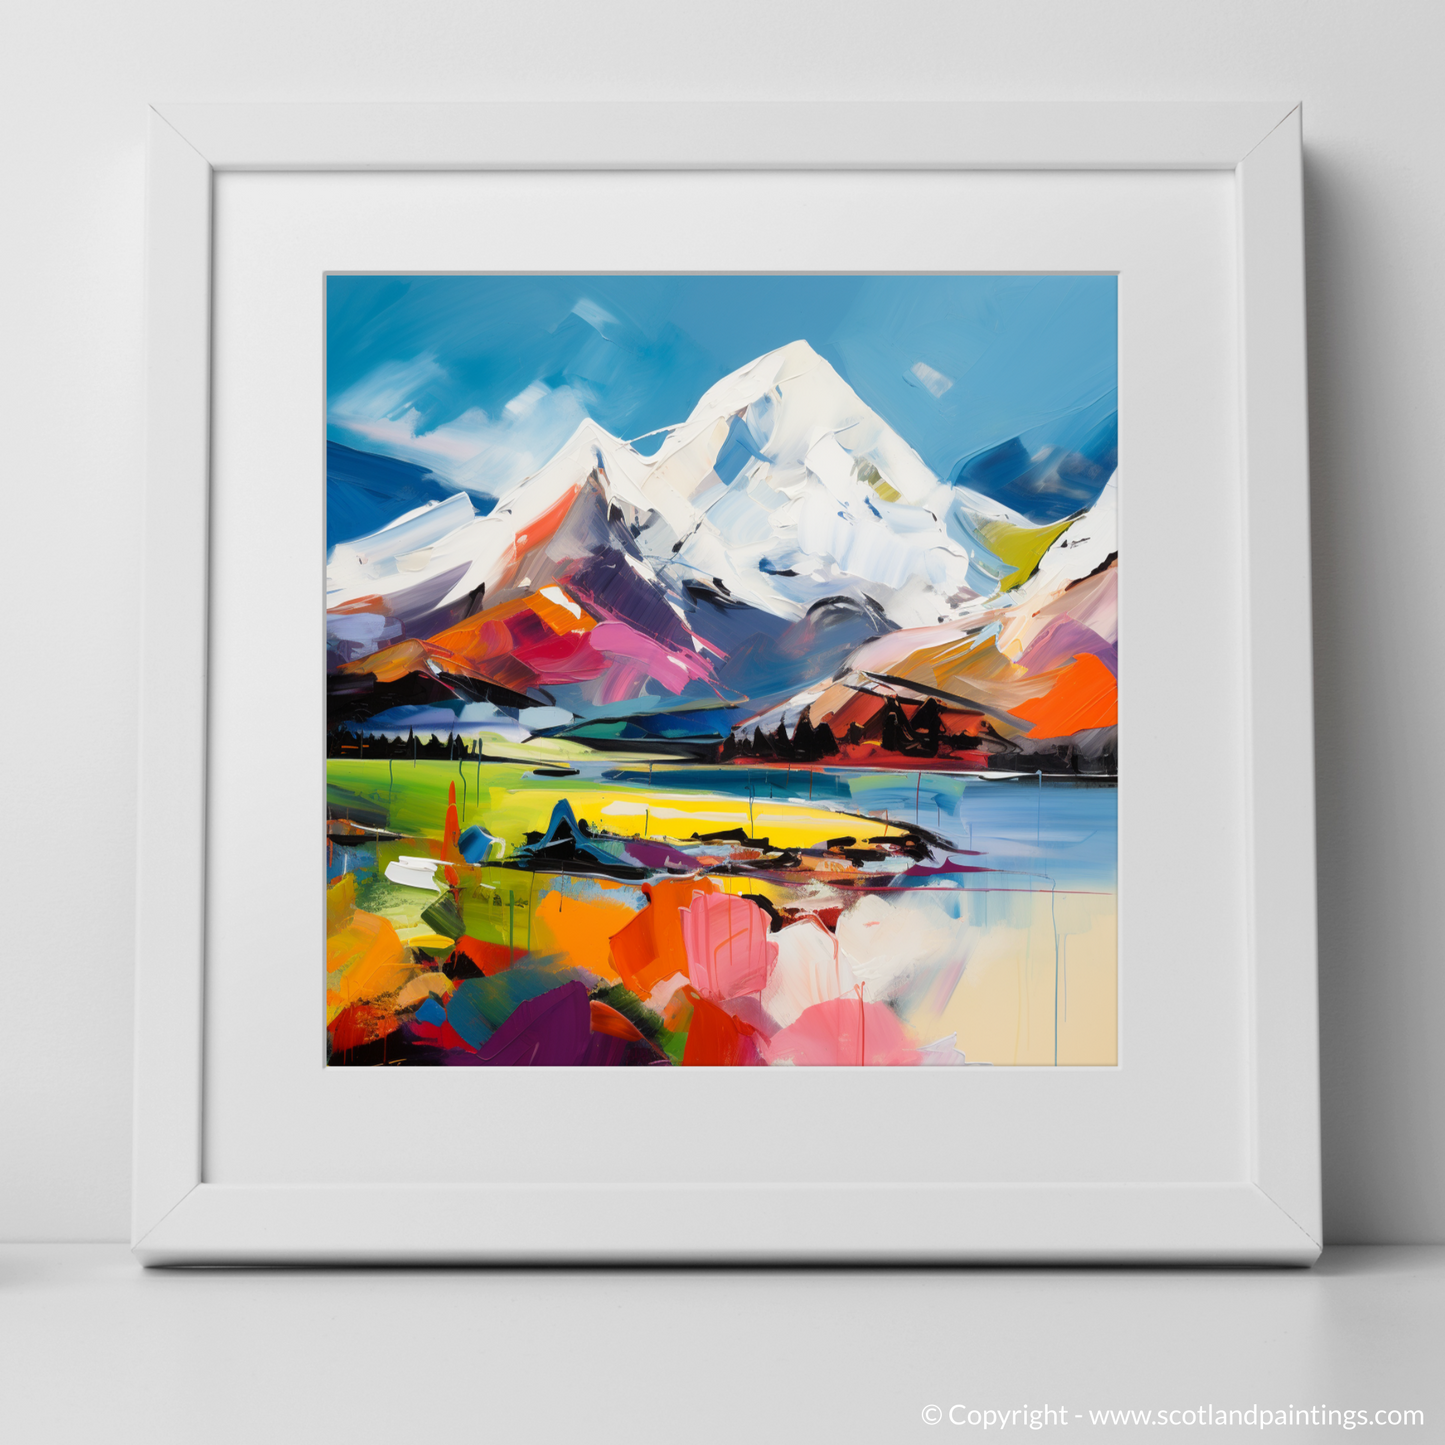 Art Print of Snow-capped peaks overlooking Loch Lomond with a white frame